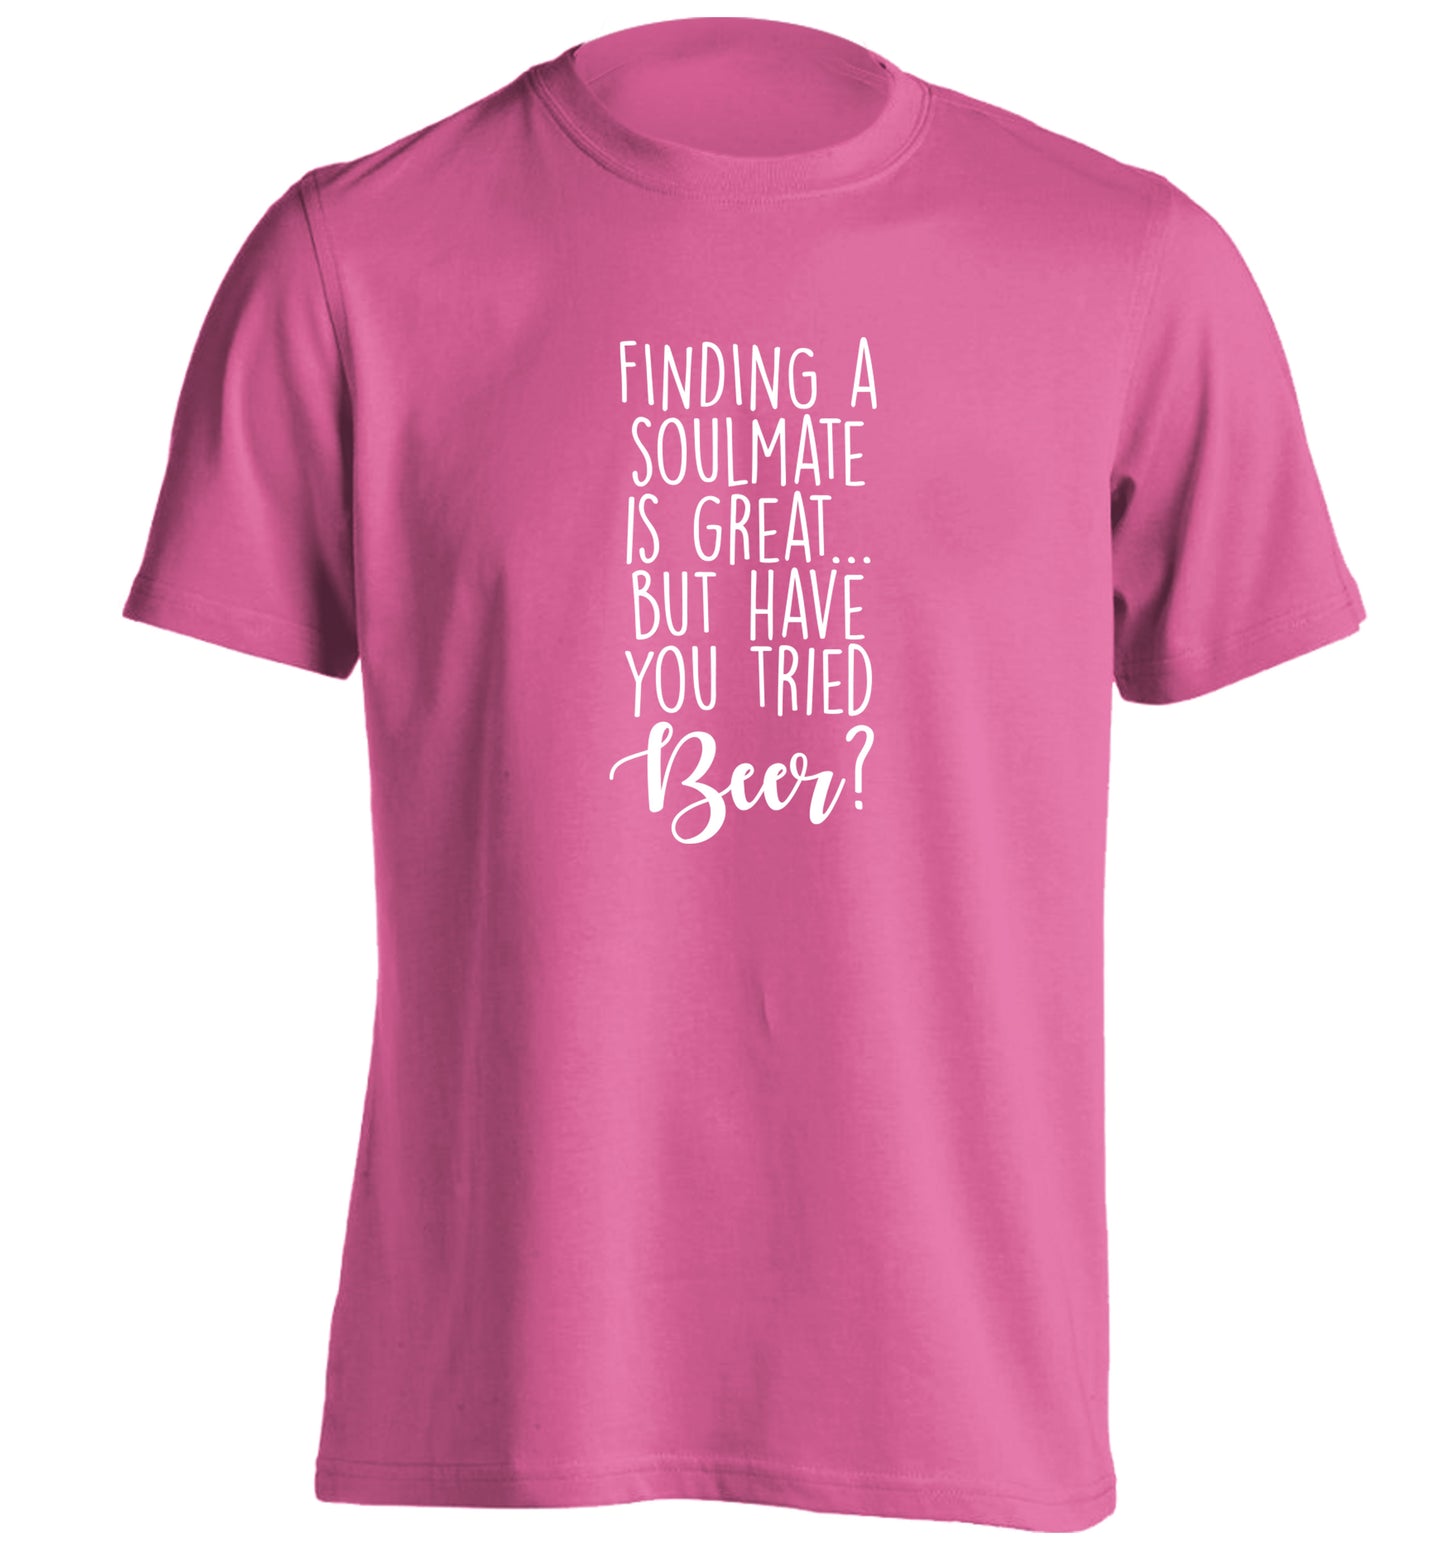 Finding a soulmate is great but have you tried beer? adults unisex pink Tshirt 2XL